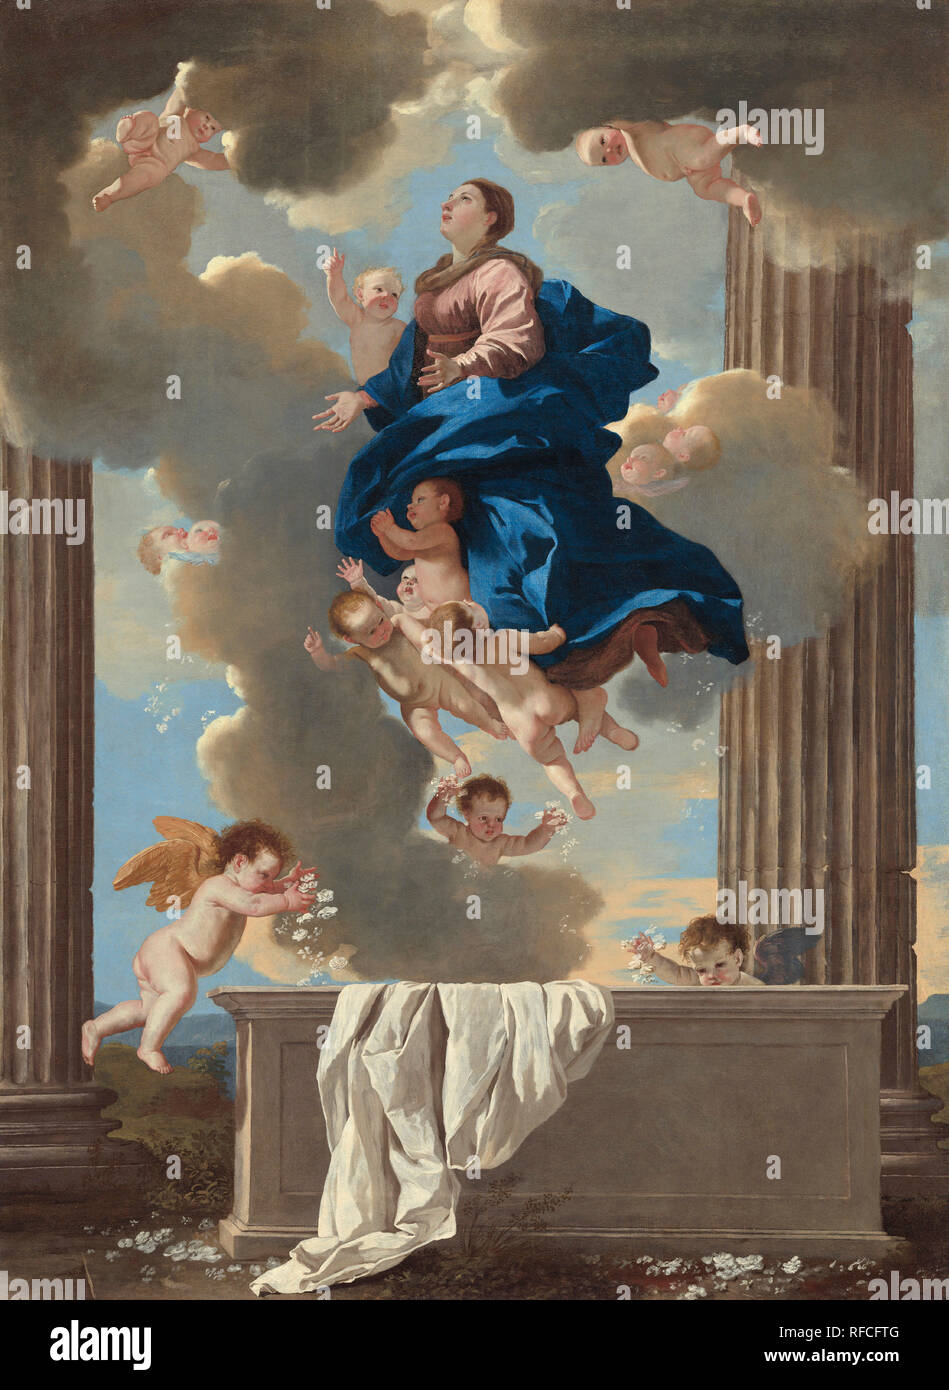 The Assumption of the Virgin. Dated: c. 1630/1632. Dimensions: overall: 134.4 x 98.1 cm (52 15/16 x 38 5/8 in.)  framed: 171.8 x 135.3 x 13.7 cm (67 5/8 x 53 1/4 x 5 3/8 in.). Medium: oil on canvas. Museum: National Gallery of Art, Washington DC. Author: NICOLAS POUSSIN. Stock Photo